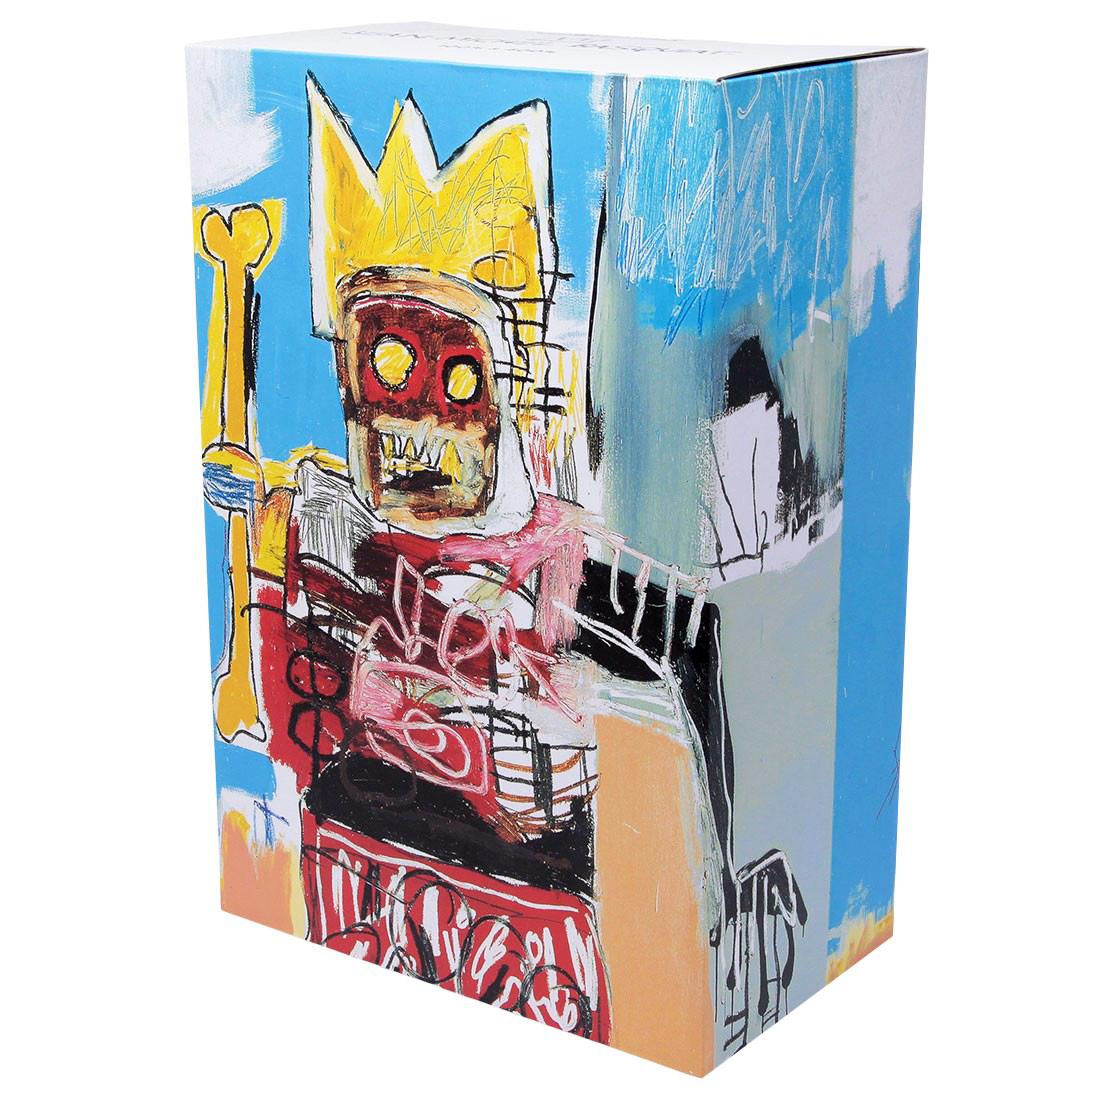 JEAN-MICHEL BASQUIAT (V6) 400% & 100%
Date of creation: 2020
Medium: Vinyl figure
Edition: Open
Size: 28 x 10 x 10 cm
Observations:
Vinyl figure published in 2020 by Medicom Toys. Sent inside its original box.
This Be@rbrick figure is covered by